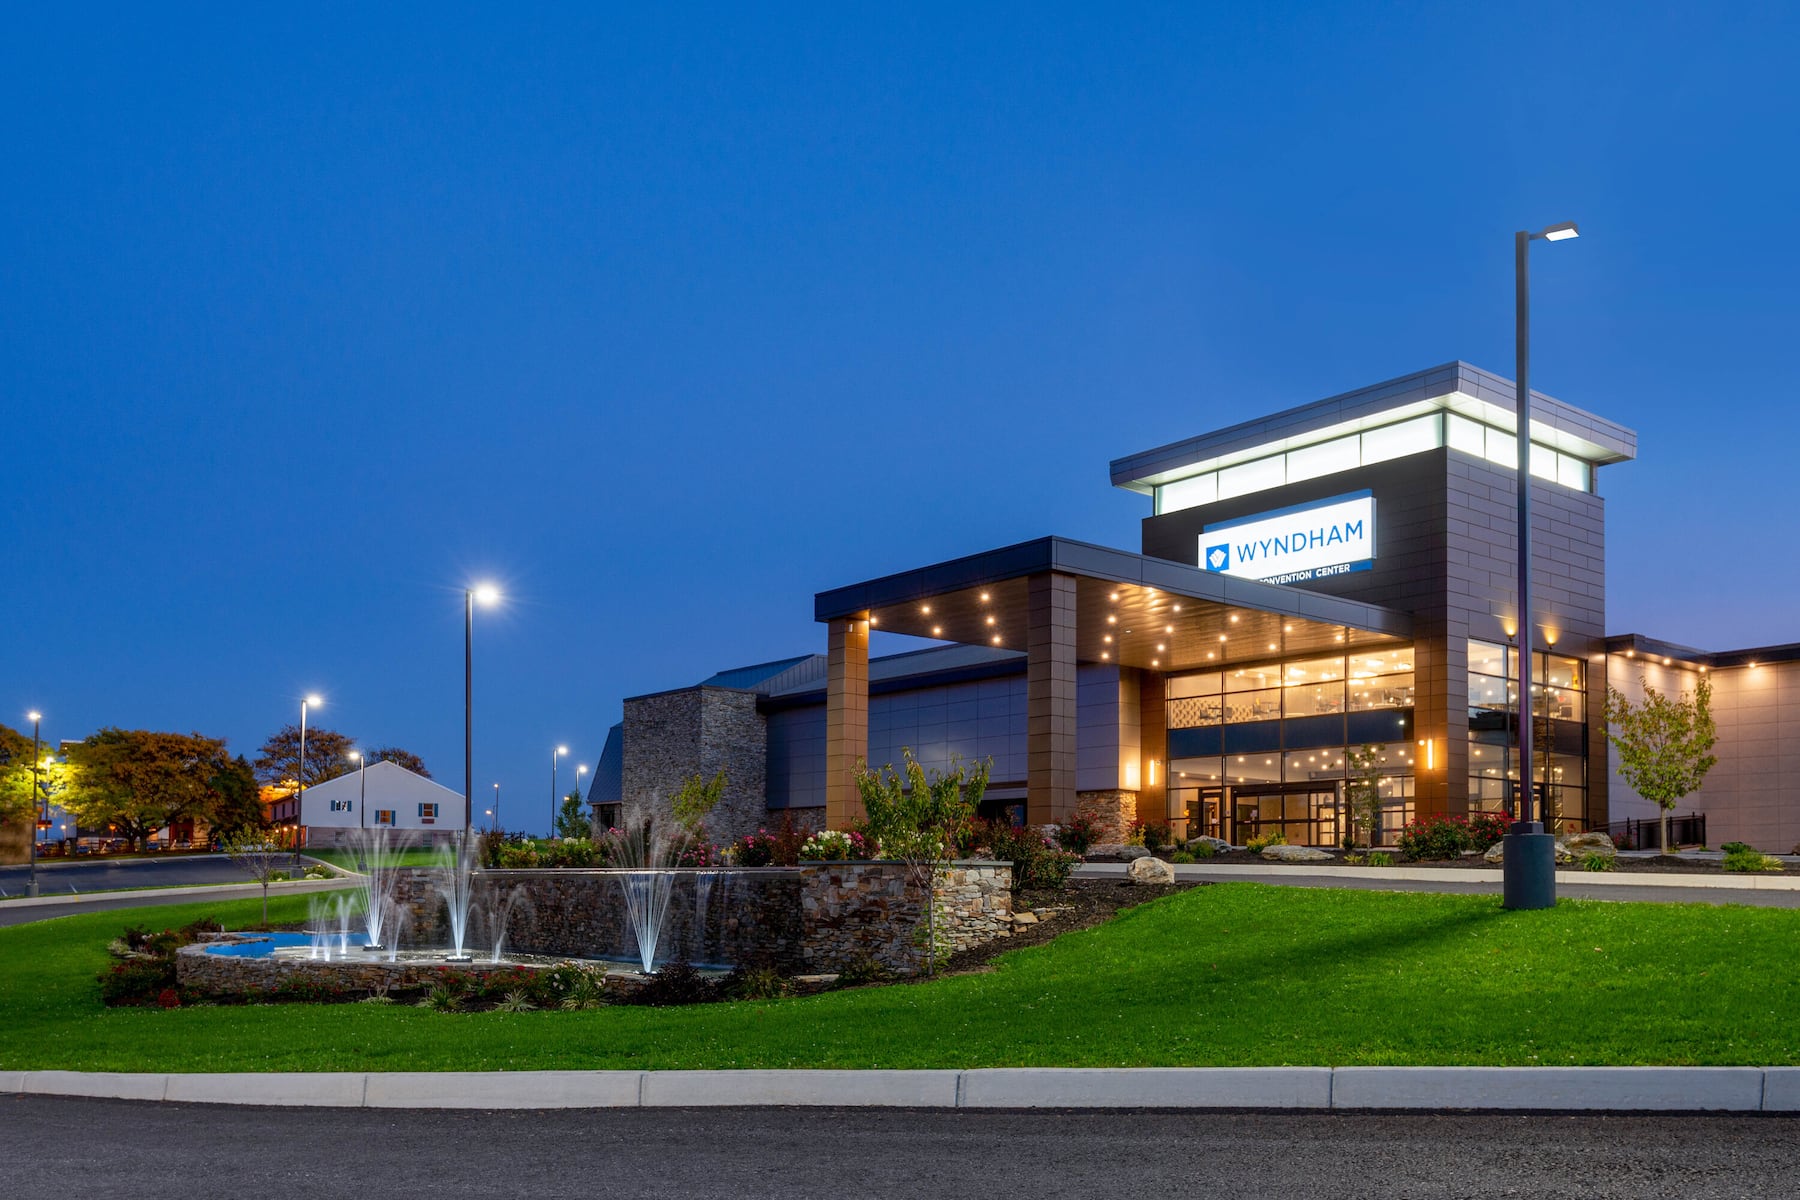 Wyndham Lancaster Resort and Convention Center Accommodations